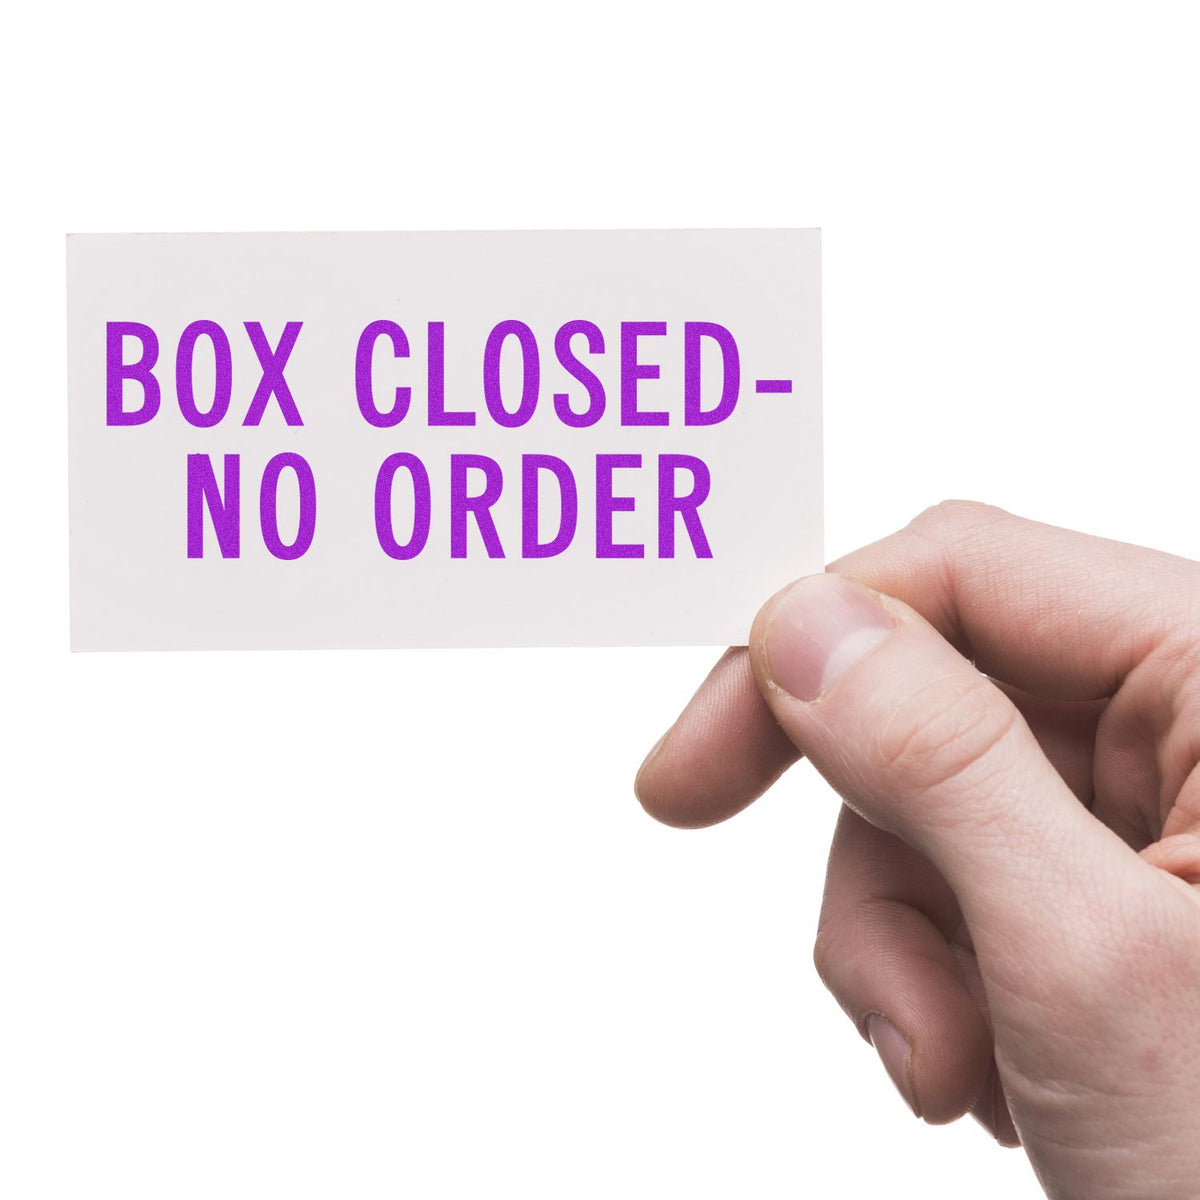 Box Closed No Order Rubber Stamp In Use